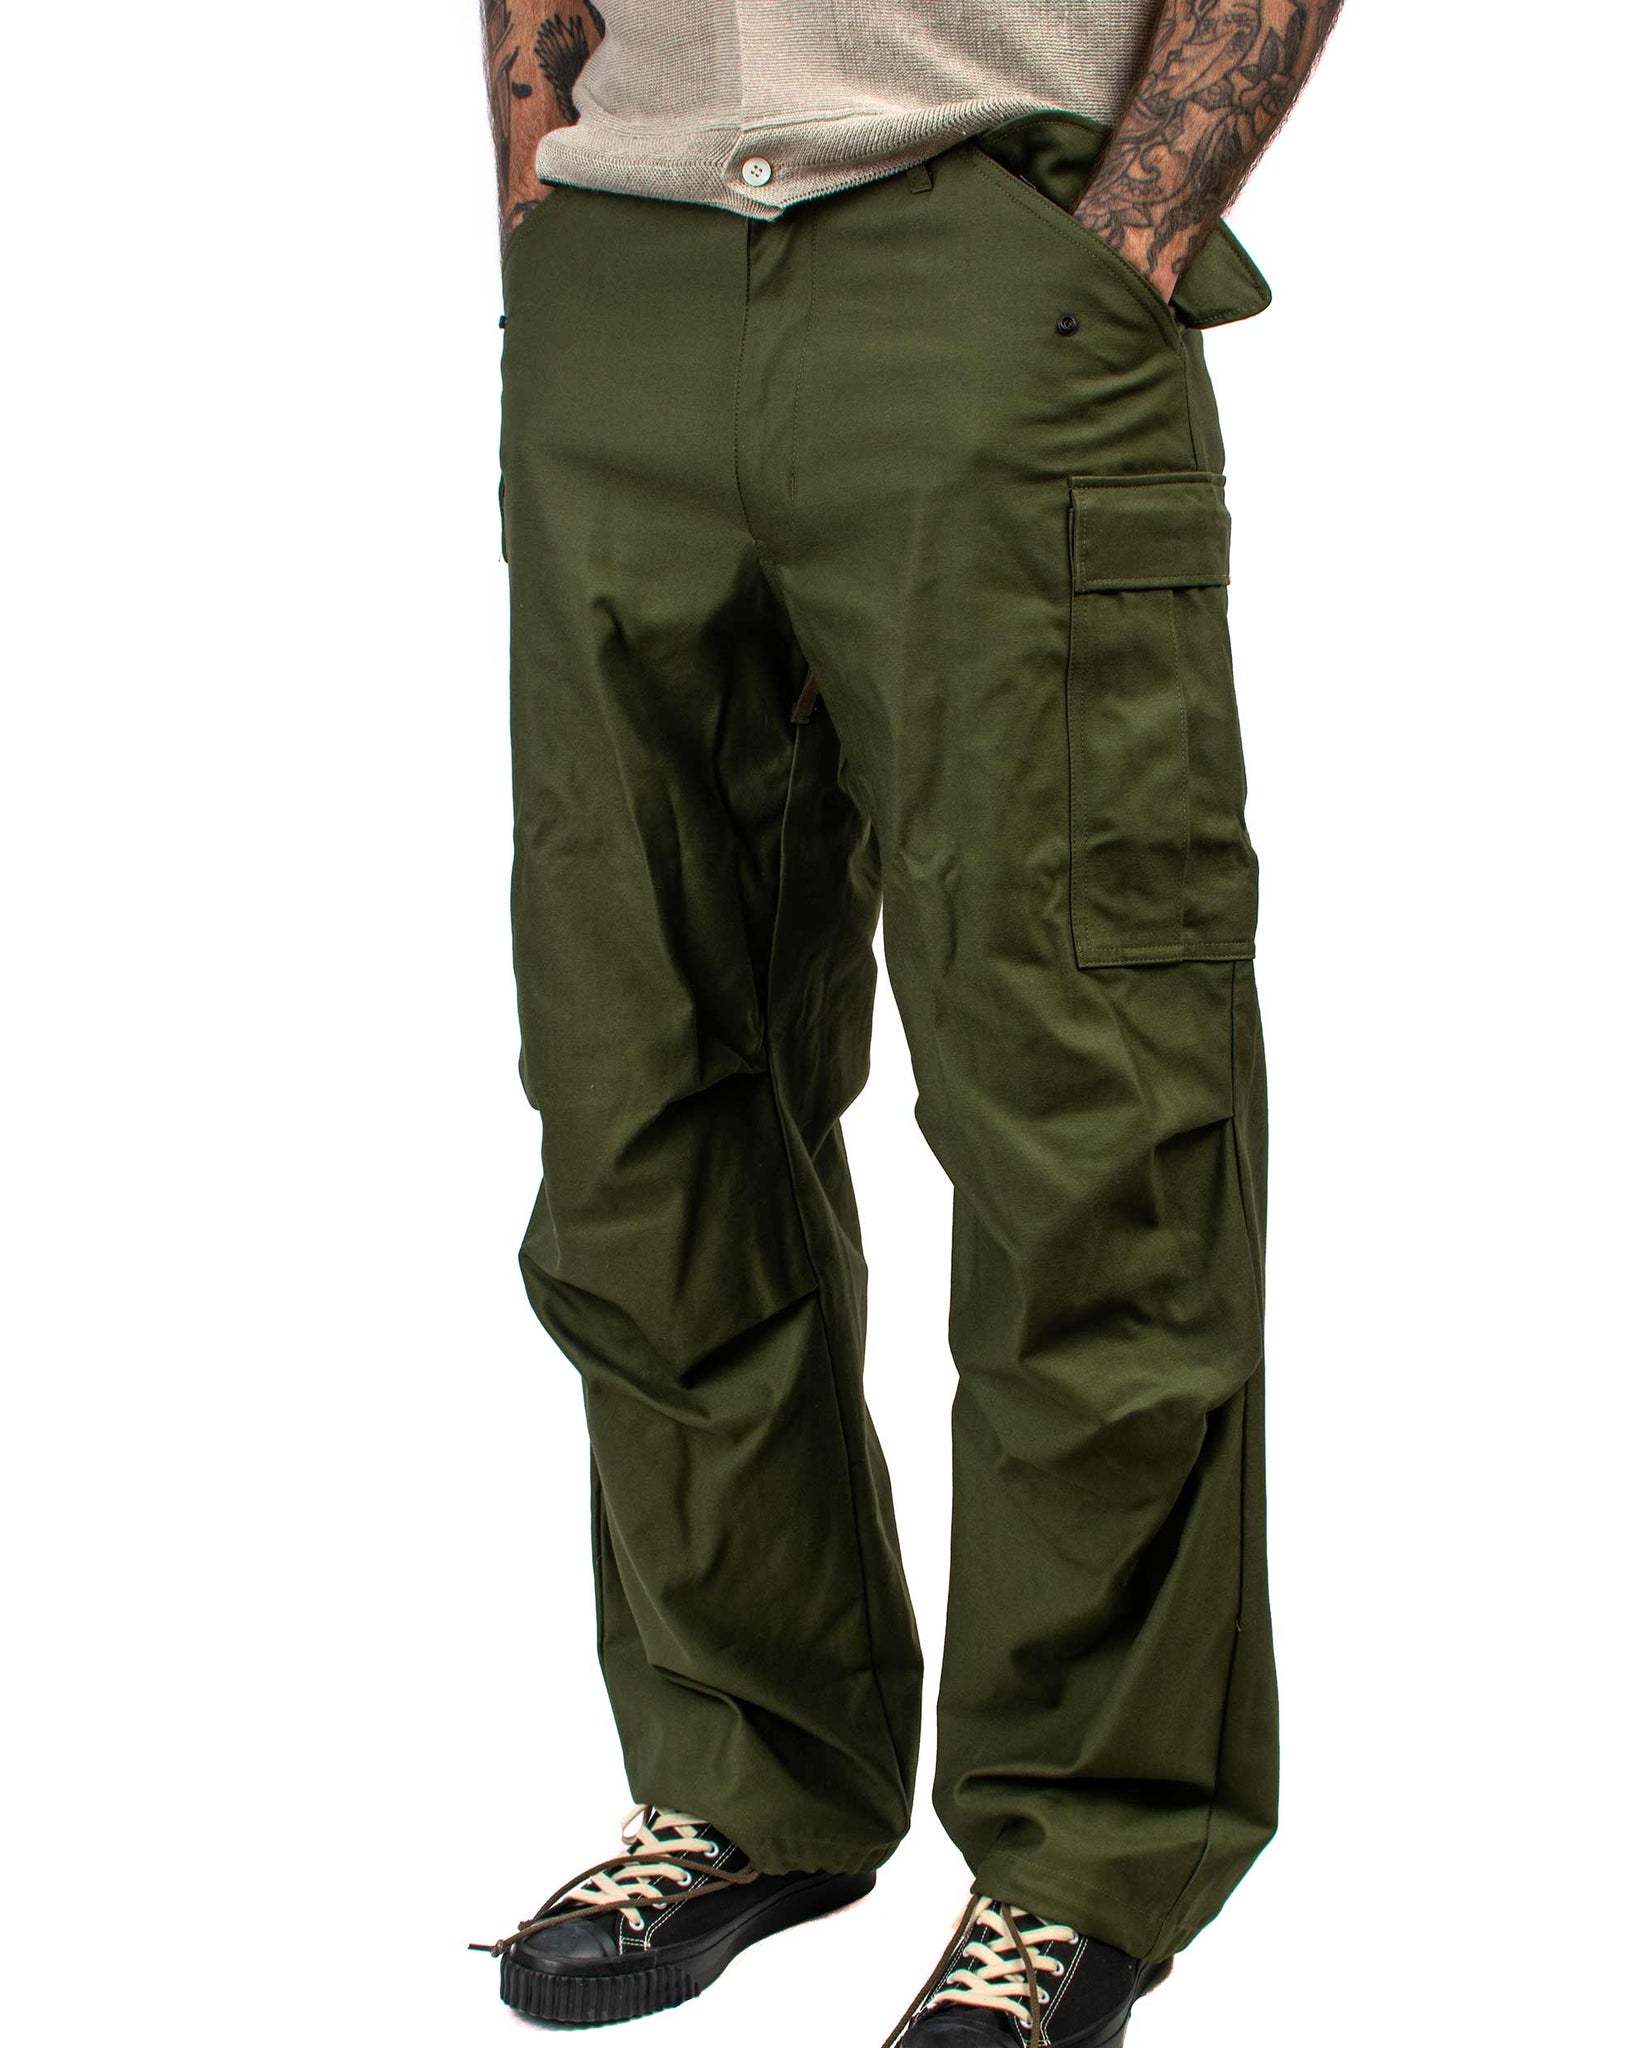 The Real McCoy's MP20005 M-65 Field Trousers OG107 Close